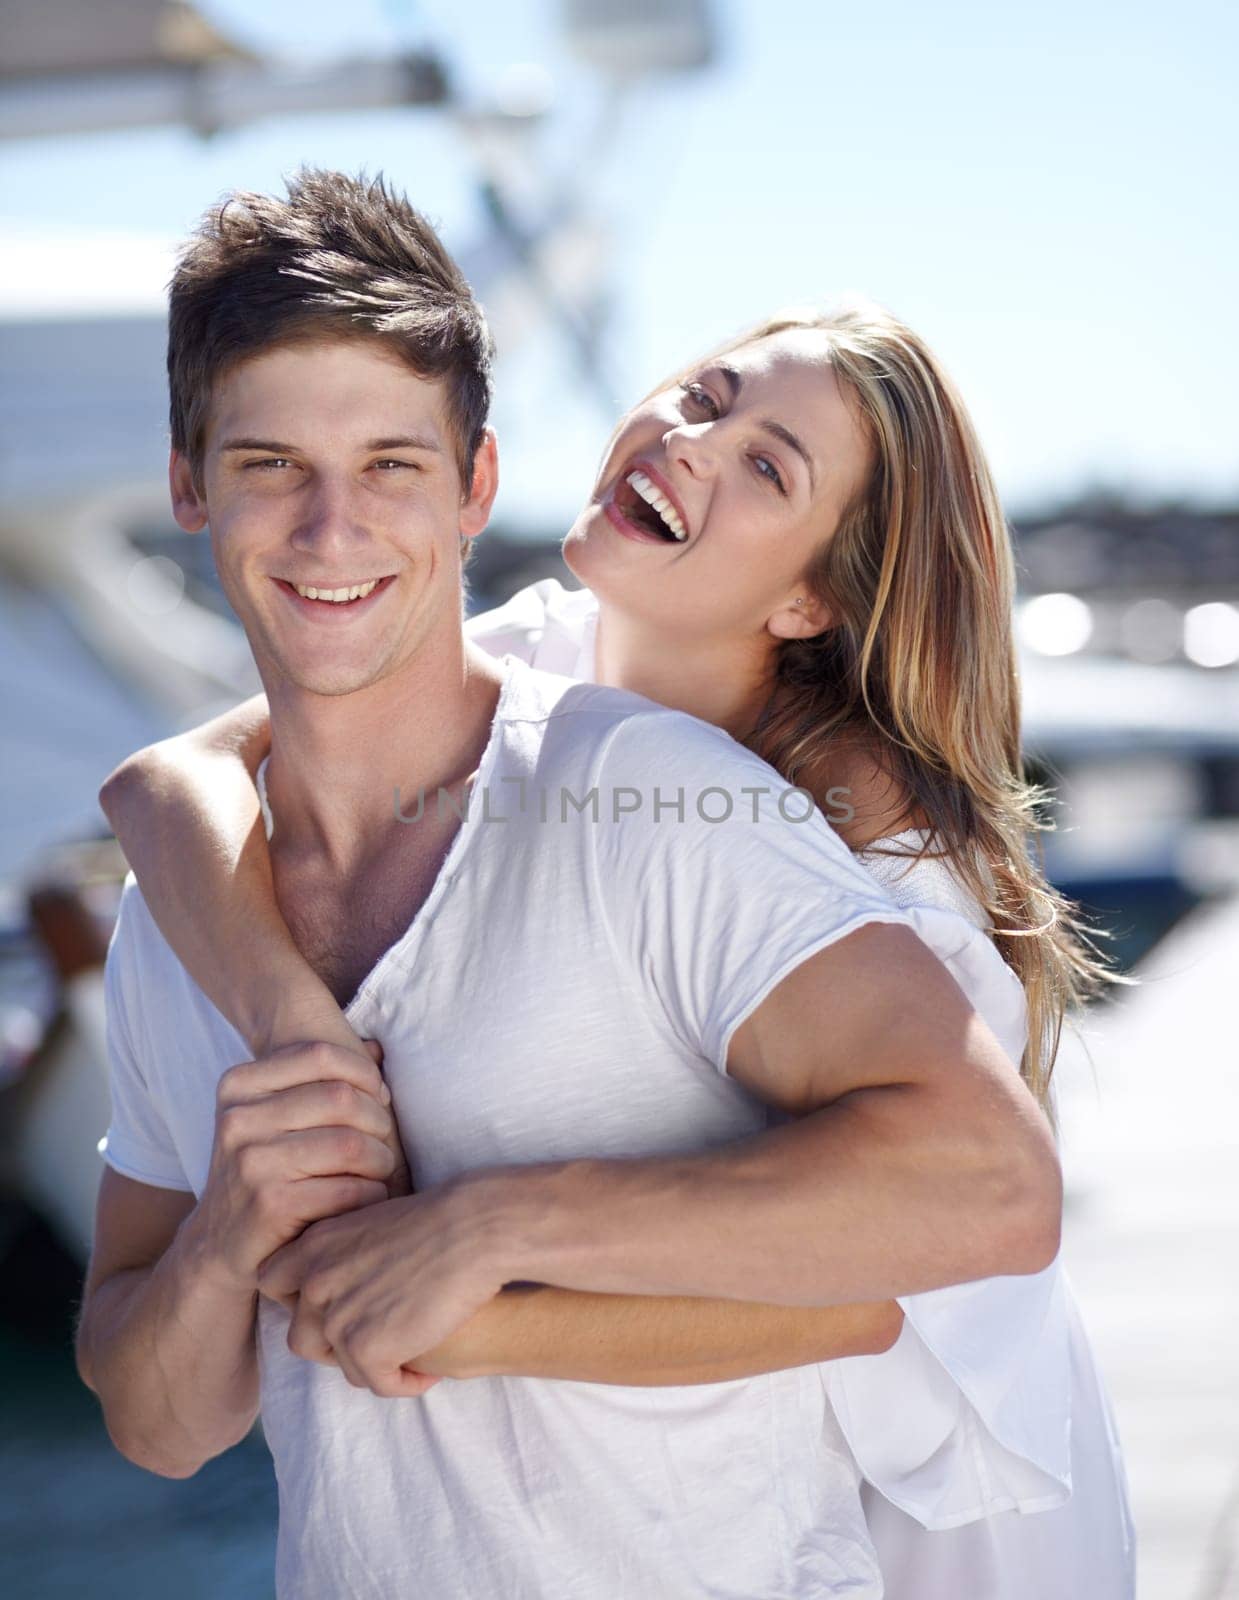 Happiness, love and portrait of couple on a date together feeling happy on a romantic vacation or holiday in summer. Portrait, travel and woman hug man in a relationship and smile outdoor with care by YuriArcurs